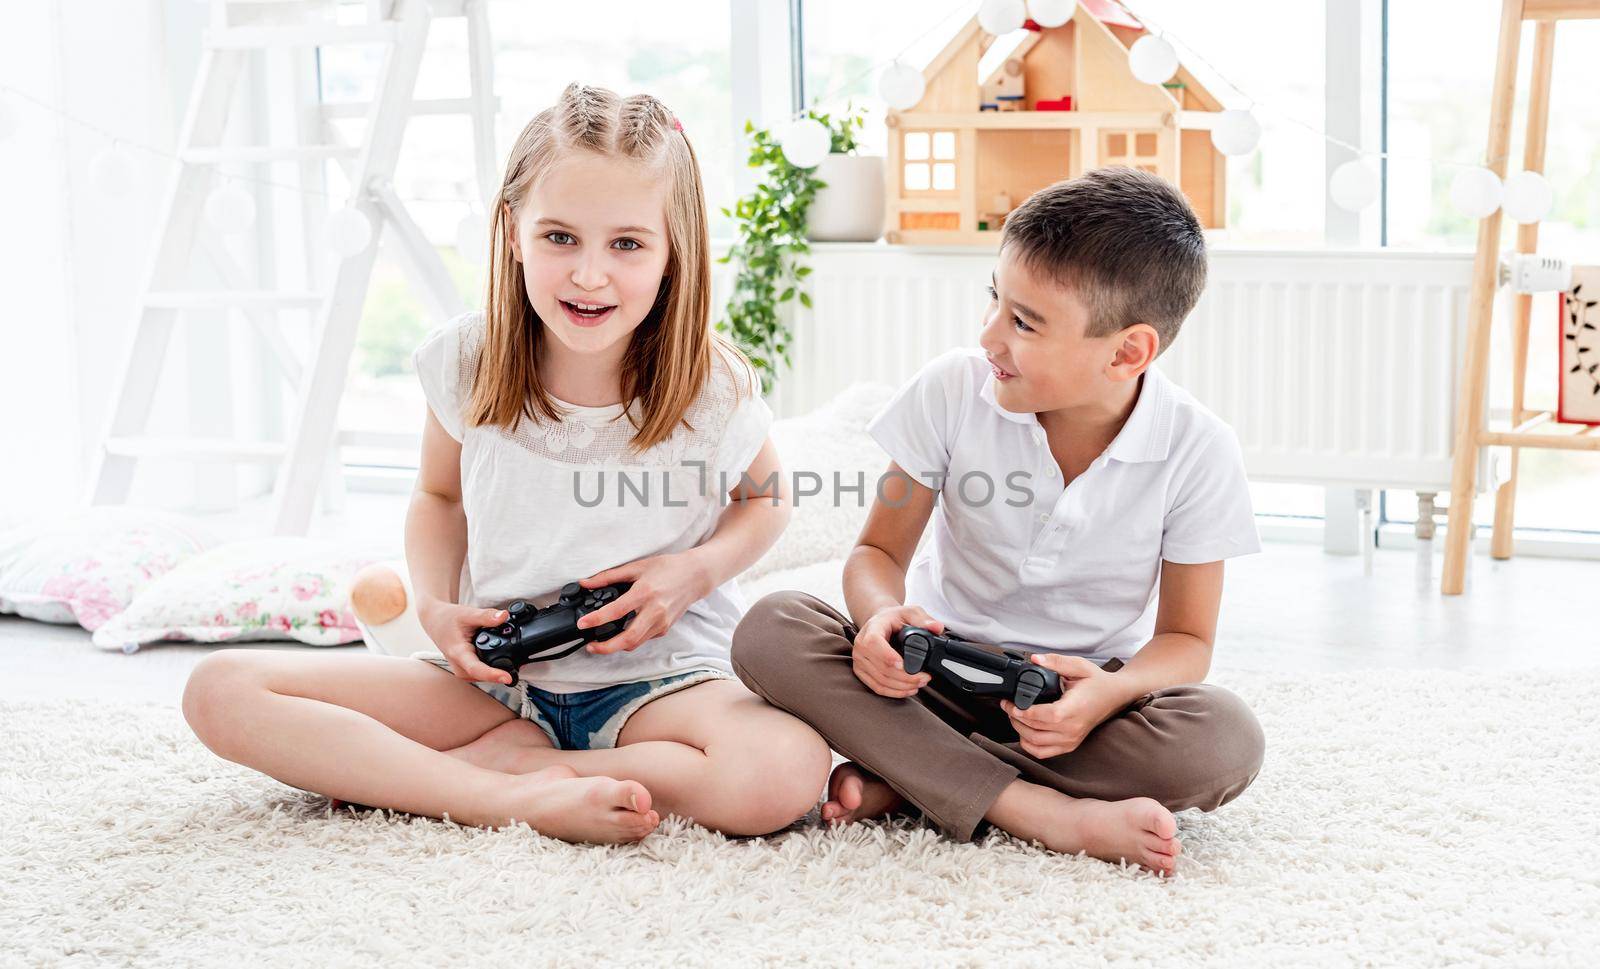 Playful kids with joysticks for gaming by tan4ikk1